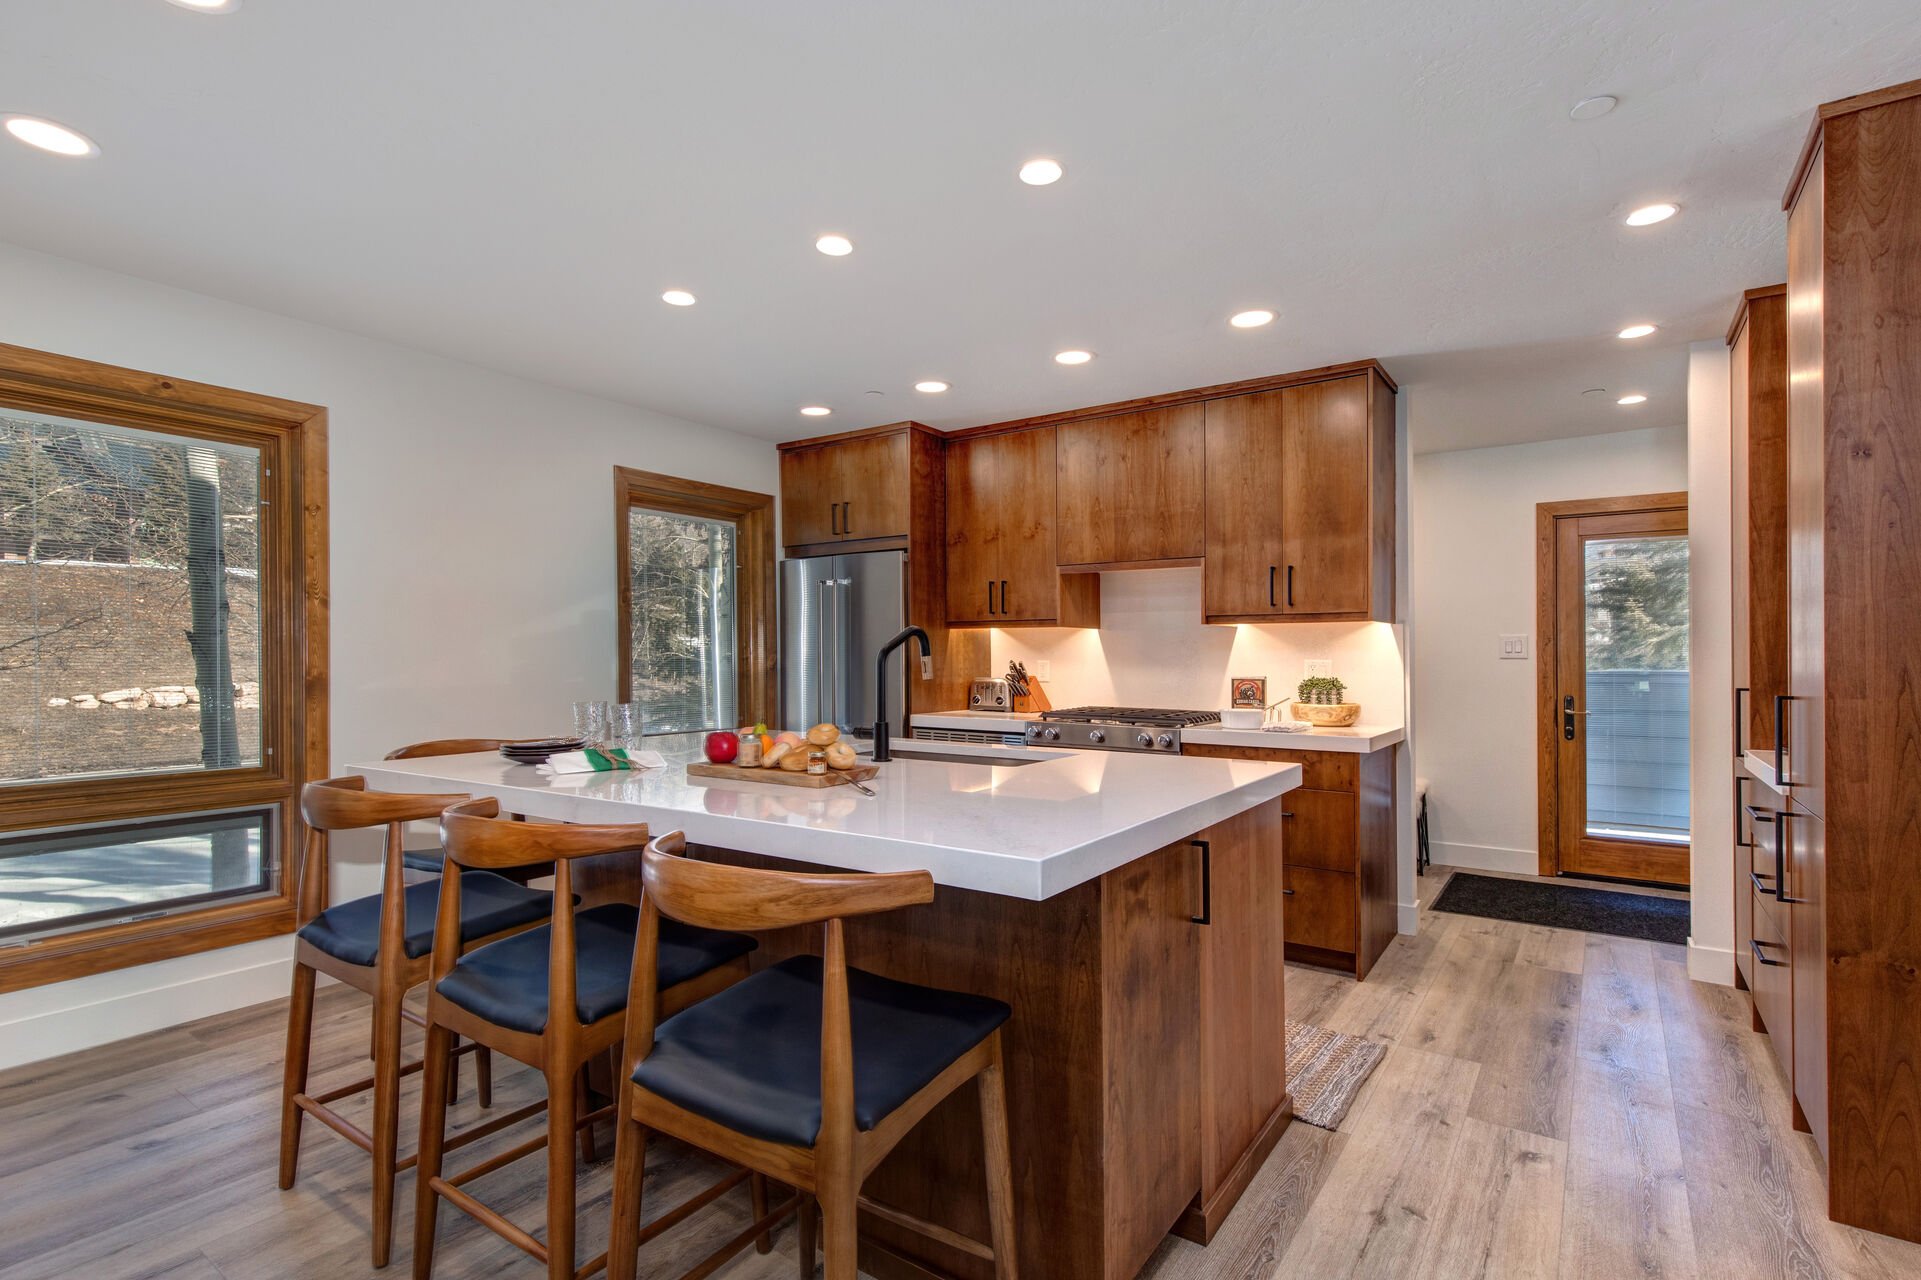 Fully equipped kitchen with new appliances, and Quartz countertop and bar seating for four